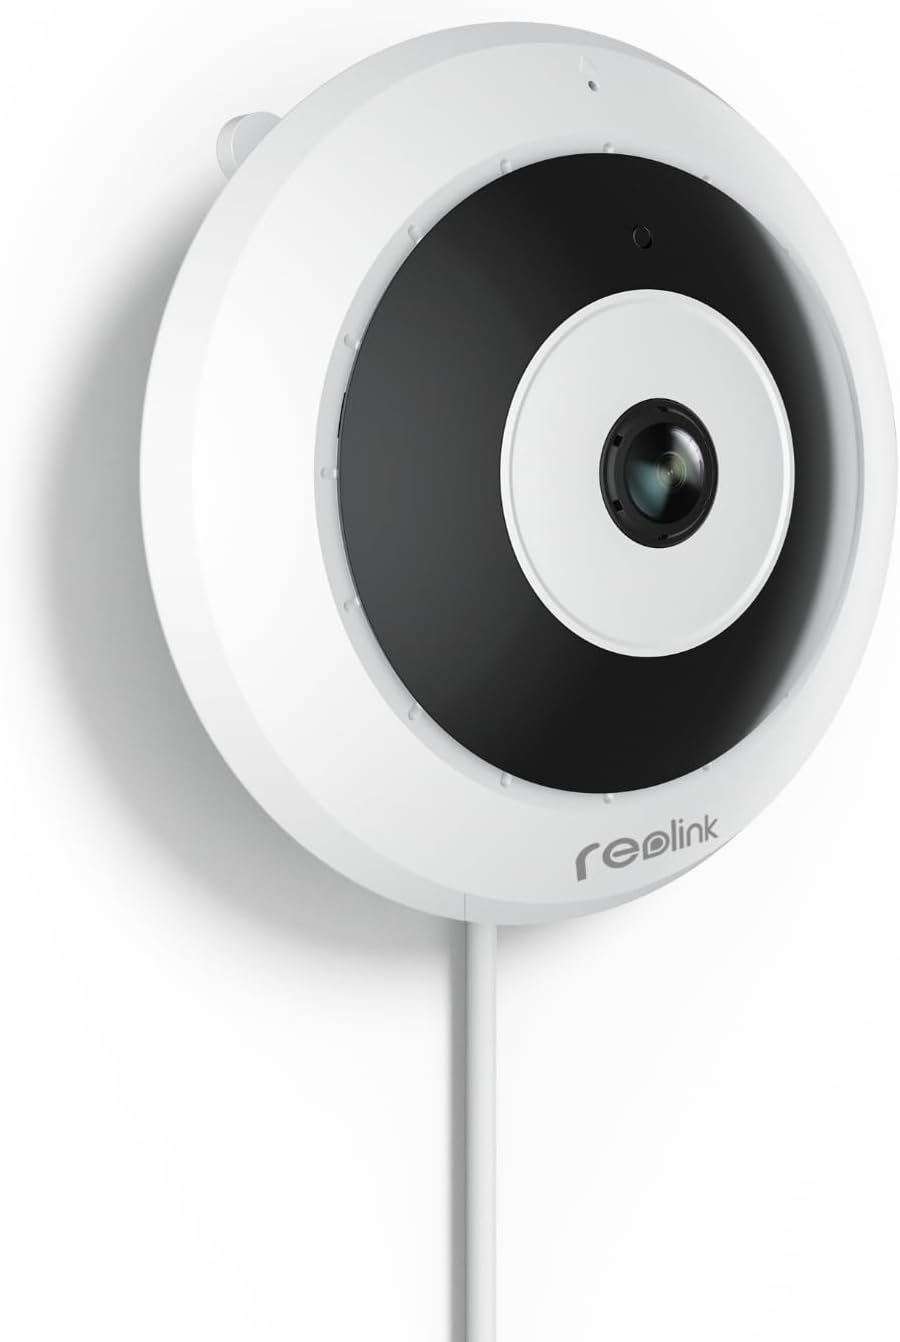 3-year warranty REOLINK PoE IP Fisheye Camera with 360° View, 6MP Indoor Camera for Home/Office Security, Smart Human Detection, Two Way Talk, Ceiling/Wall/Desk Mount, Multiple Panoramic Display Views, FE-P (White)